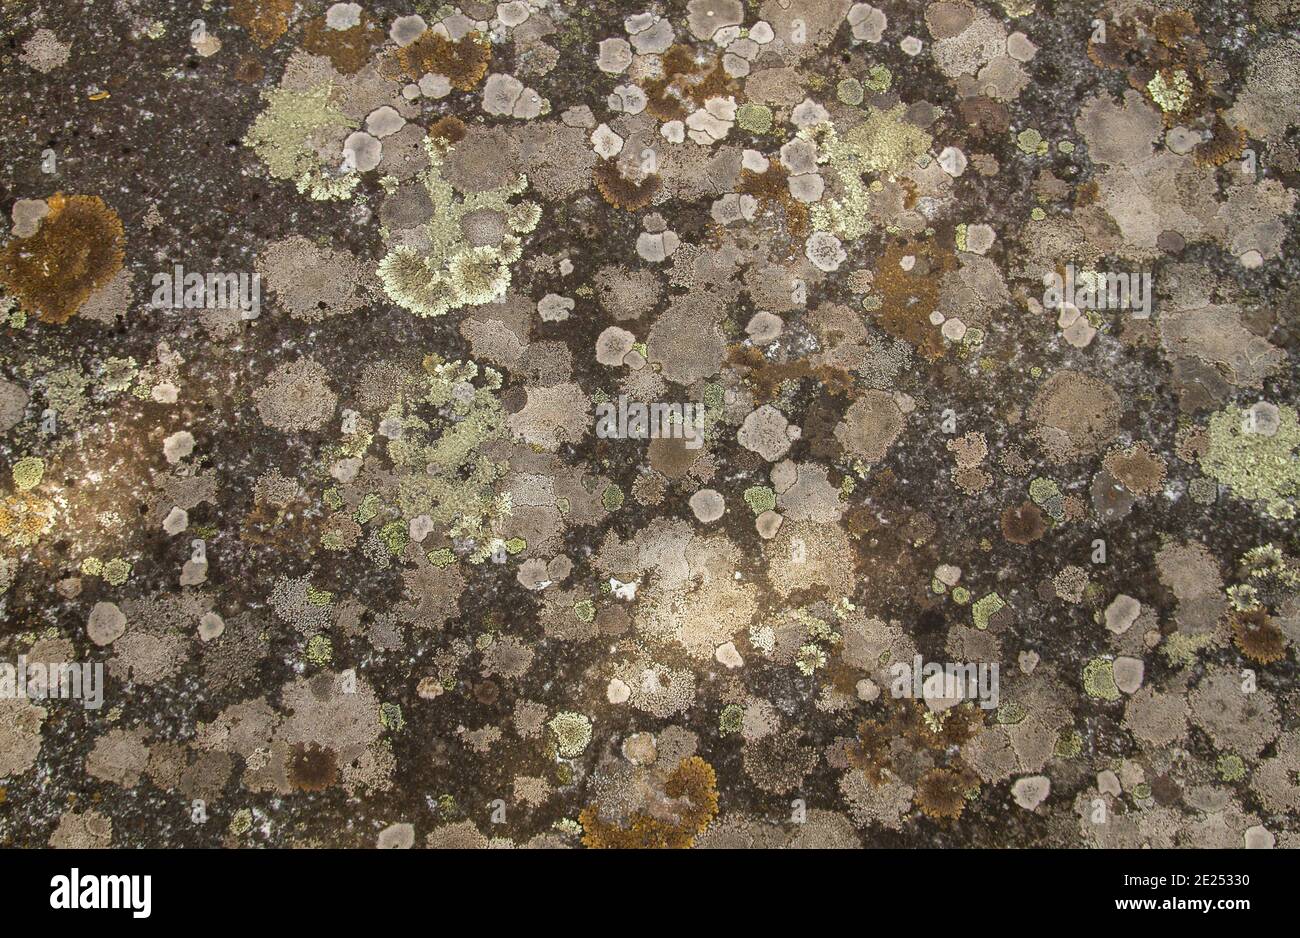 Lichens growing on a stone surface Stock Photo